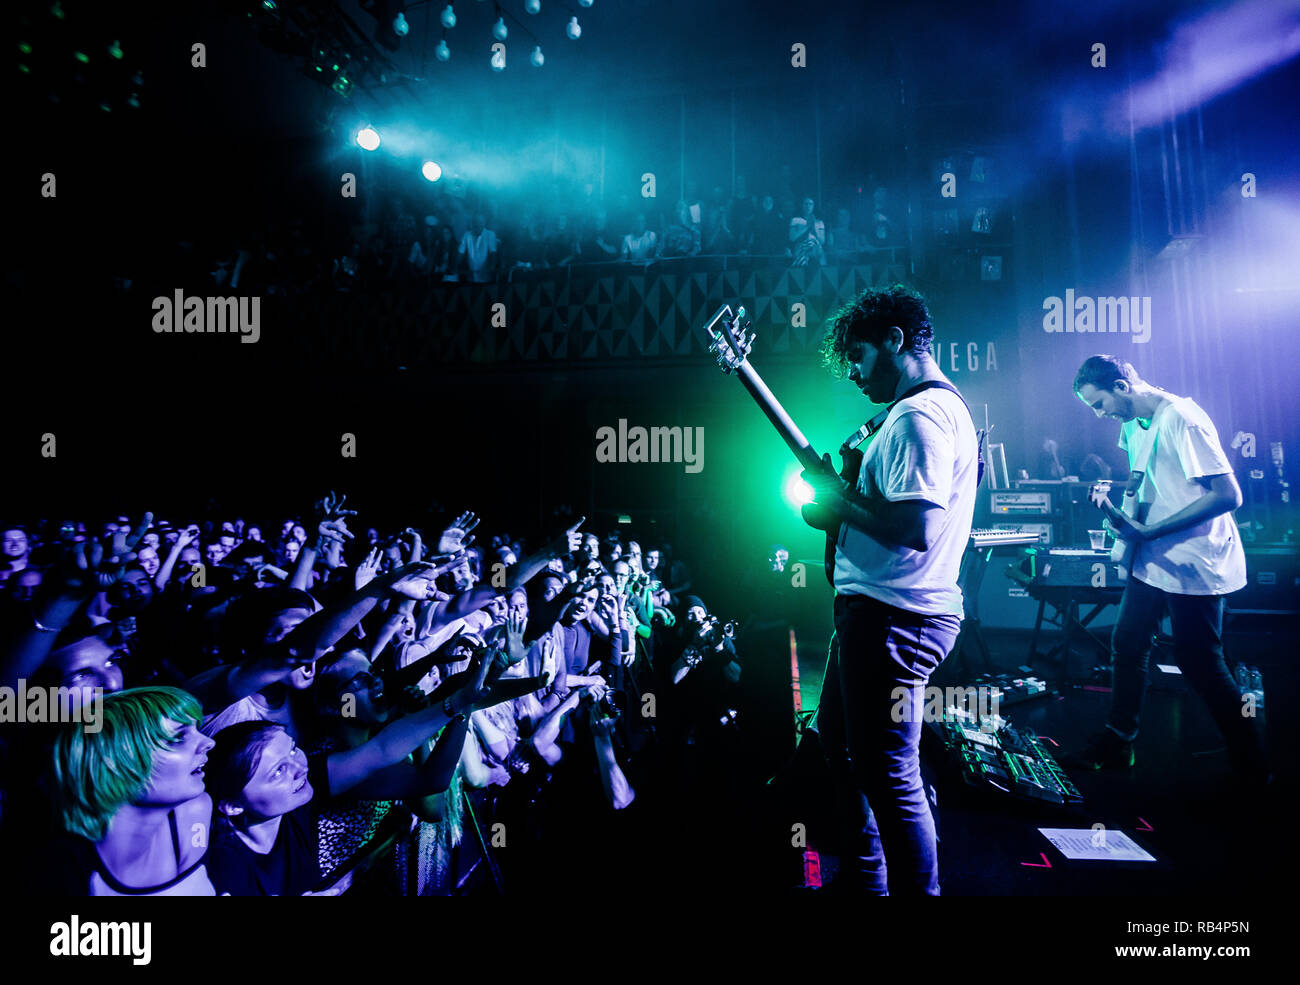 Foals The English Indie Rock Band Perform A Liv Concert At Vega In Copenhagen Here Singer And Guitarist Yannis Philippakis Is Seen Live On Stage With Guitarist Jimmy Smith R Denmark 10 09